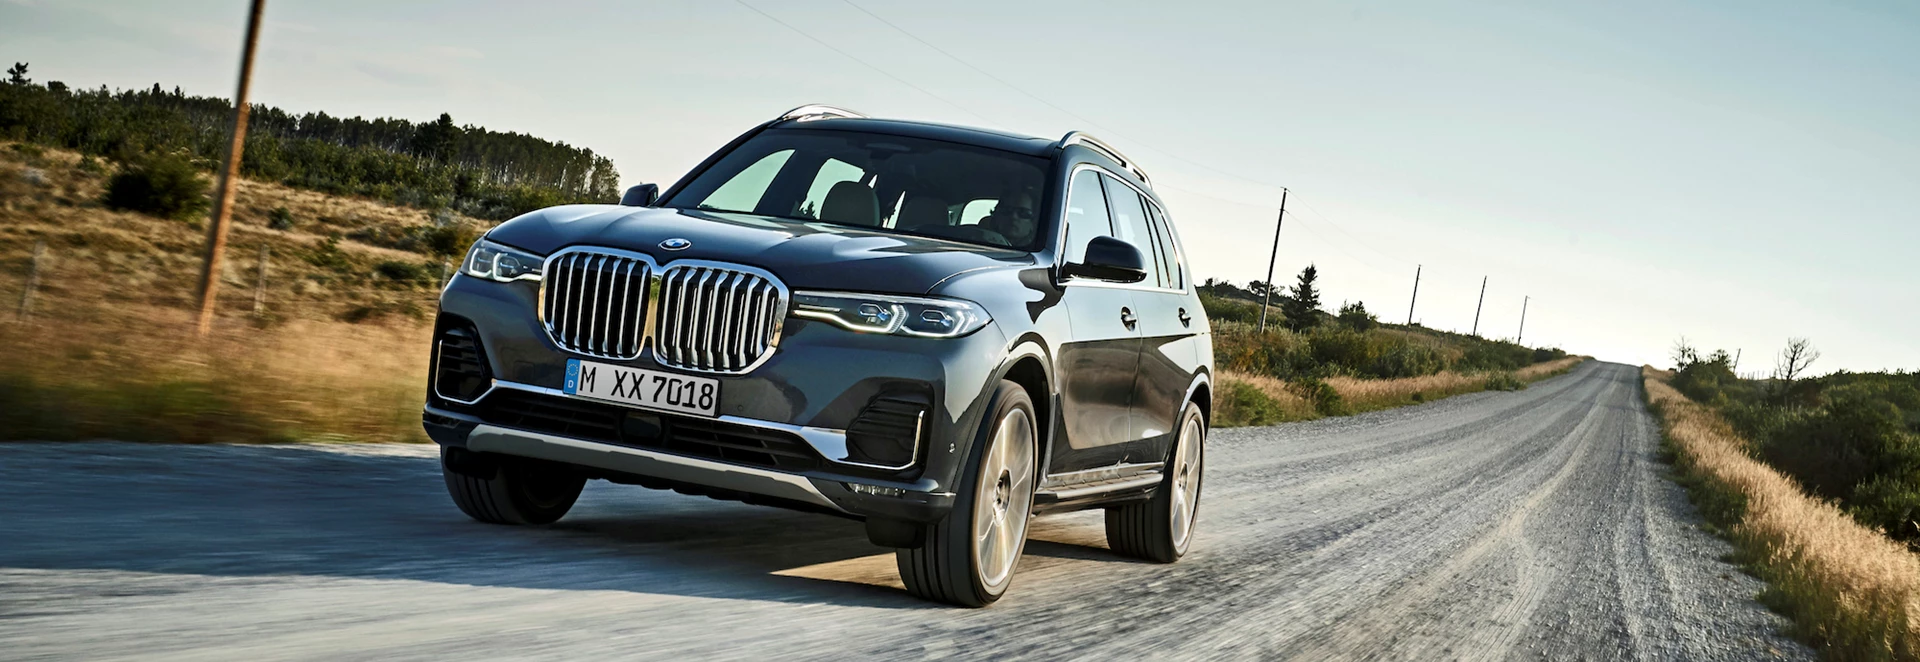 BMW unveils all-new X7 for 2019 